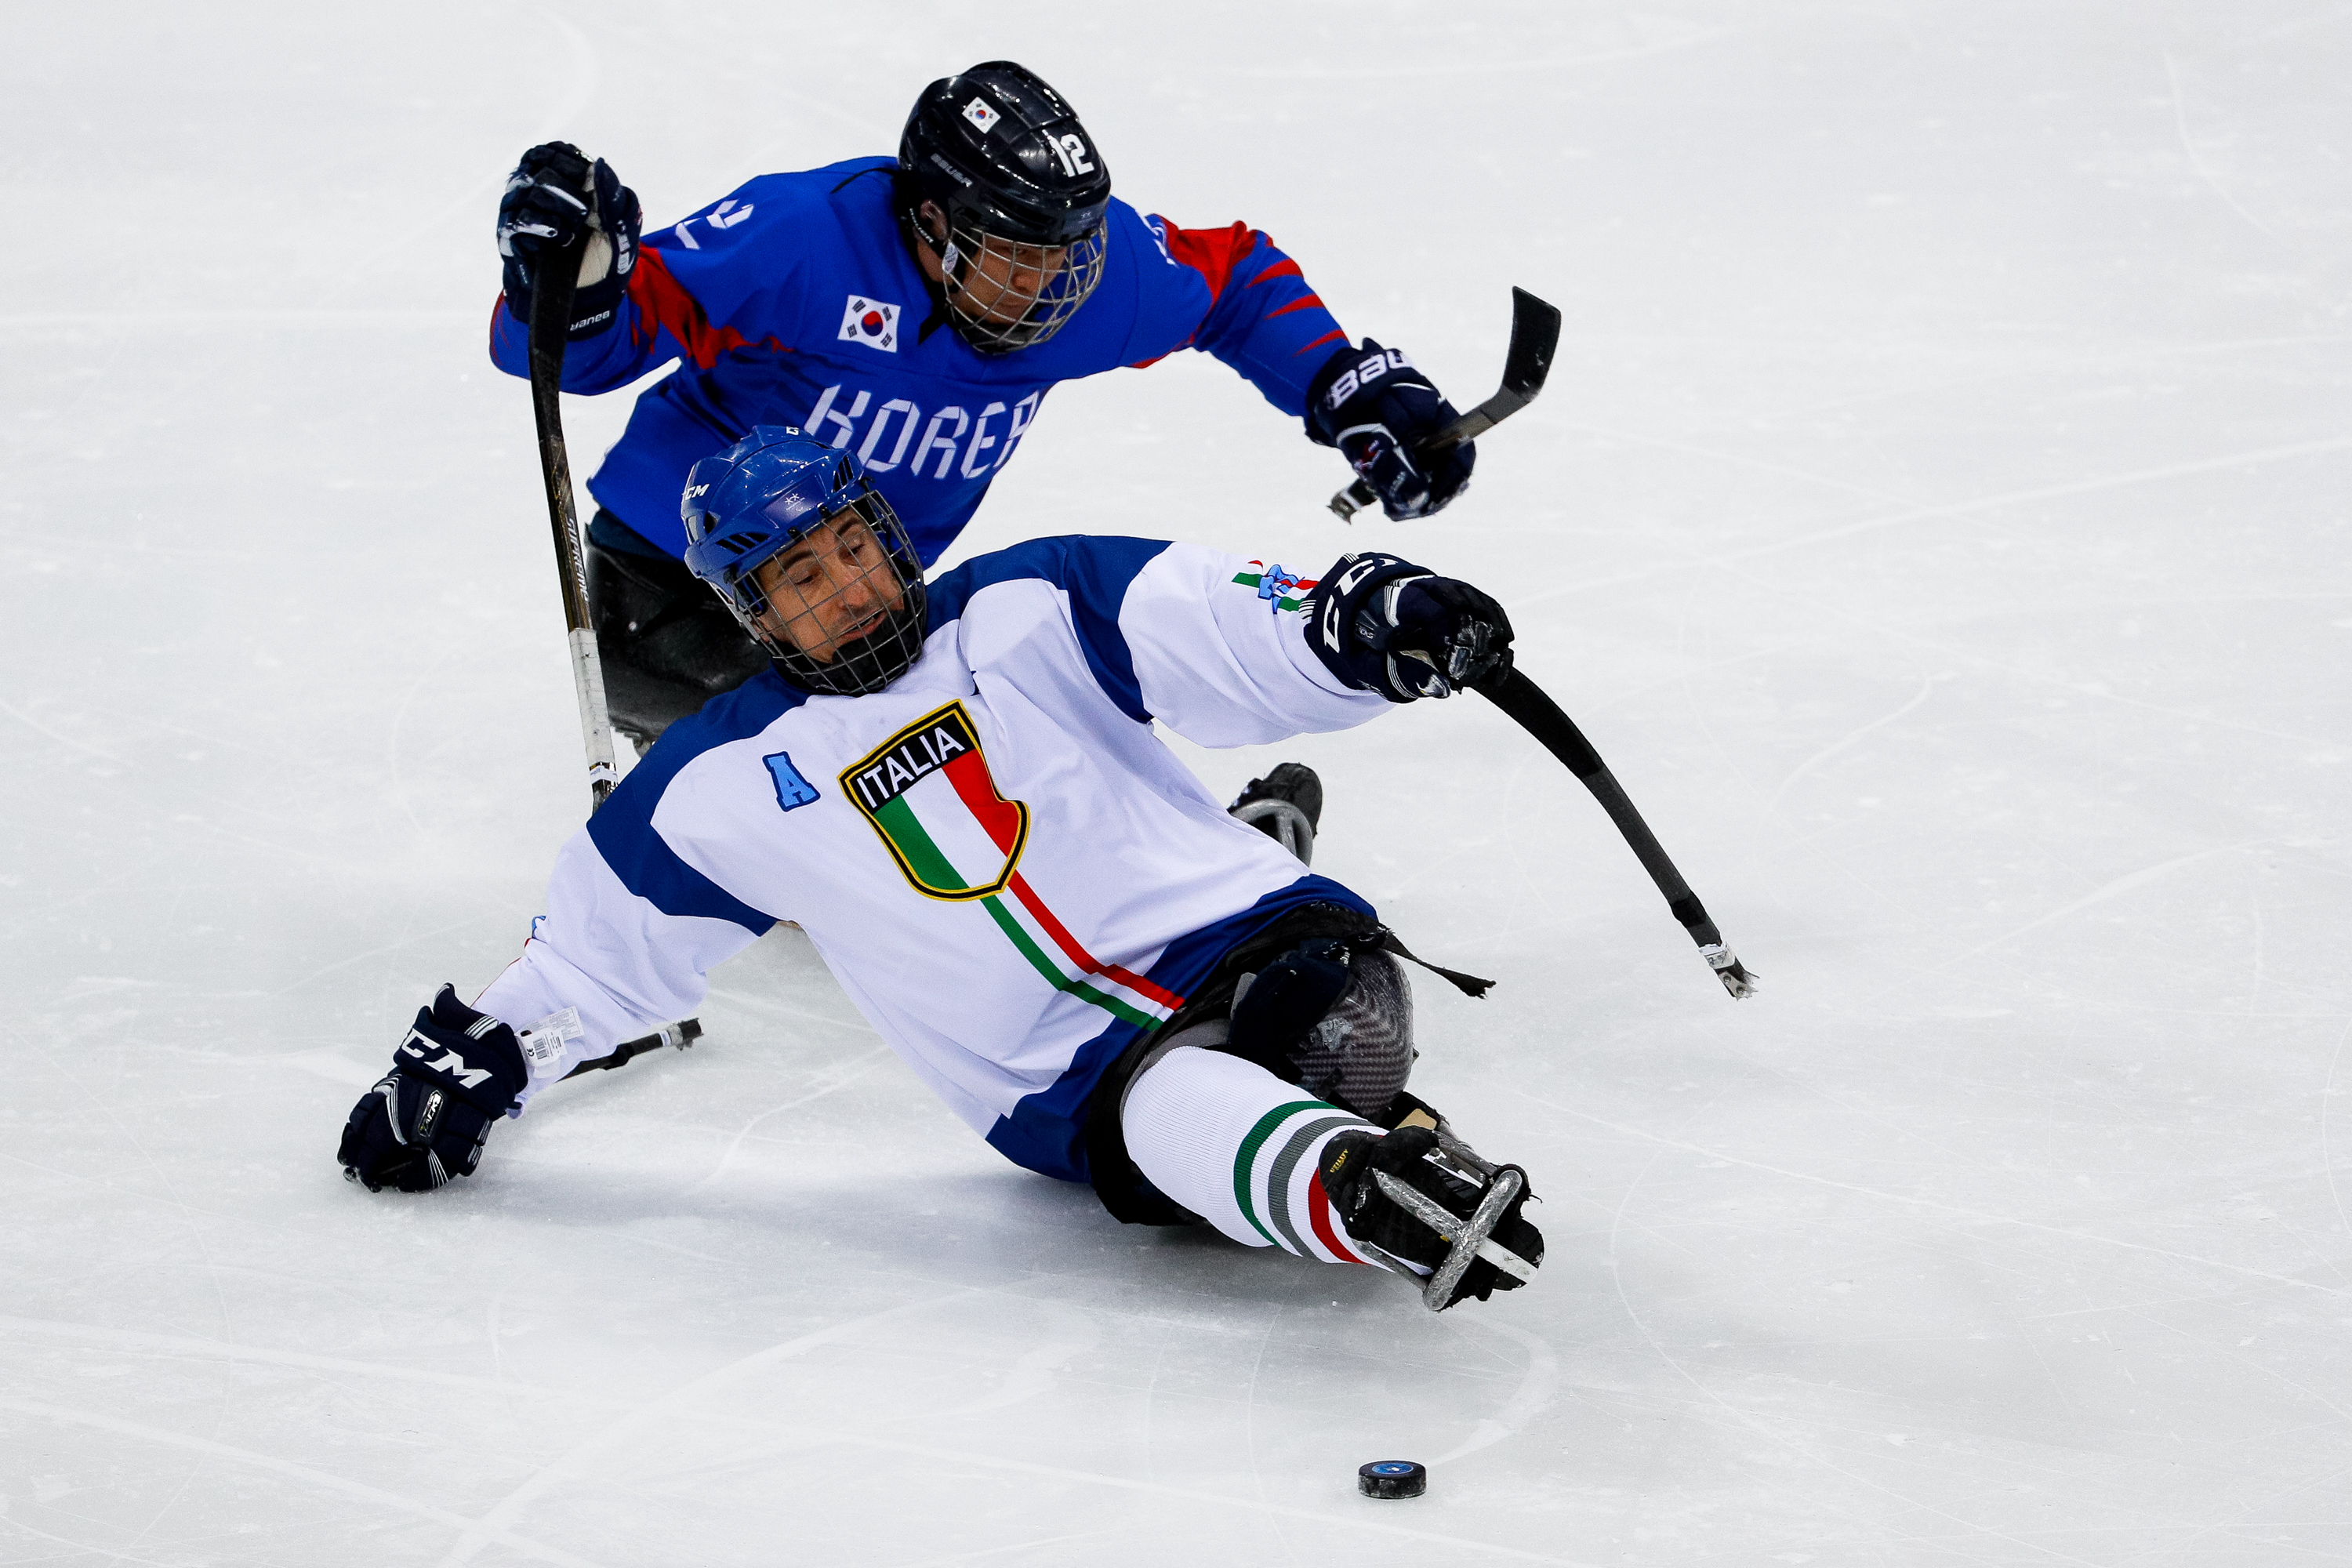 GANGNEUNG, SOUTH KOREA - MARCH 17: Young Sung Kim of Korea battles for the puck with Greg Leperdi of Italy in the Ice Hockey bronze medal game between Korea and Italy during day eight of the PyeongChang 2018 Paralympic Games on March 17, 2018 in Gangneung, South Korea. (Photo by Buda Mendes/Getty Images) 